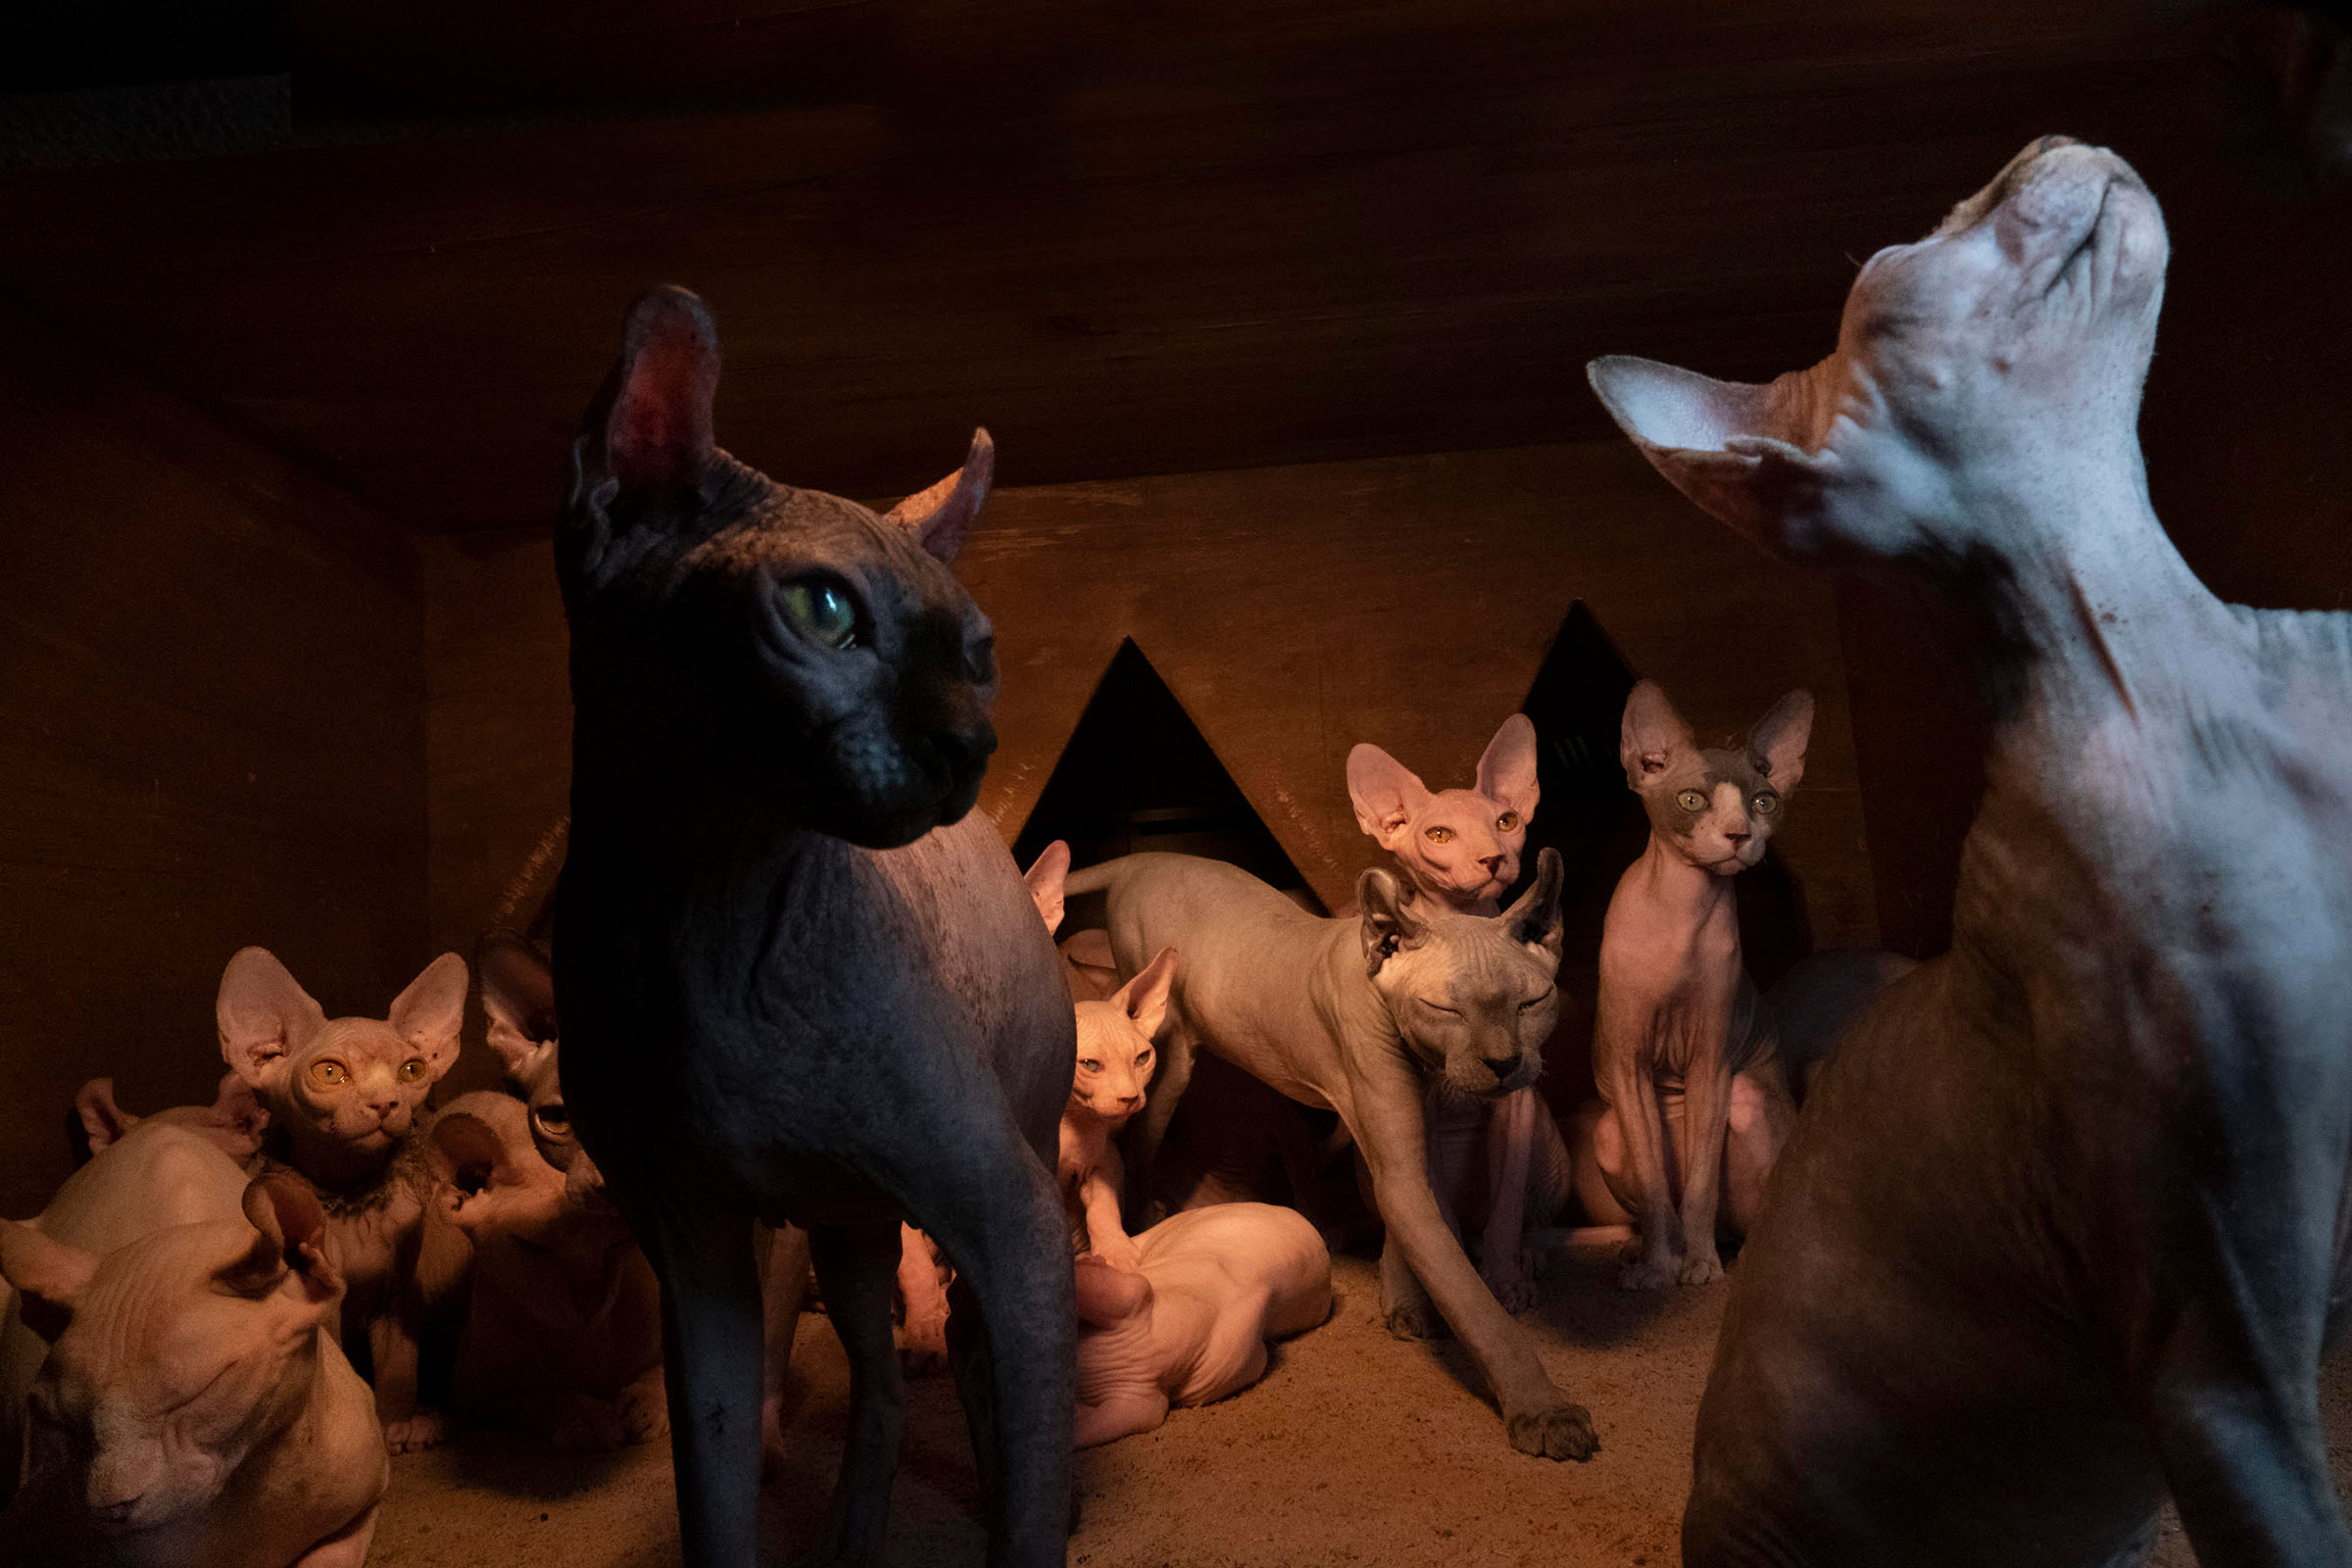 Sphynx cats who reside in a Soon Bok cafe in Cheonan, South Korea. (Robin Schwartz for The New York Times Magazine)